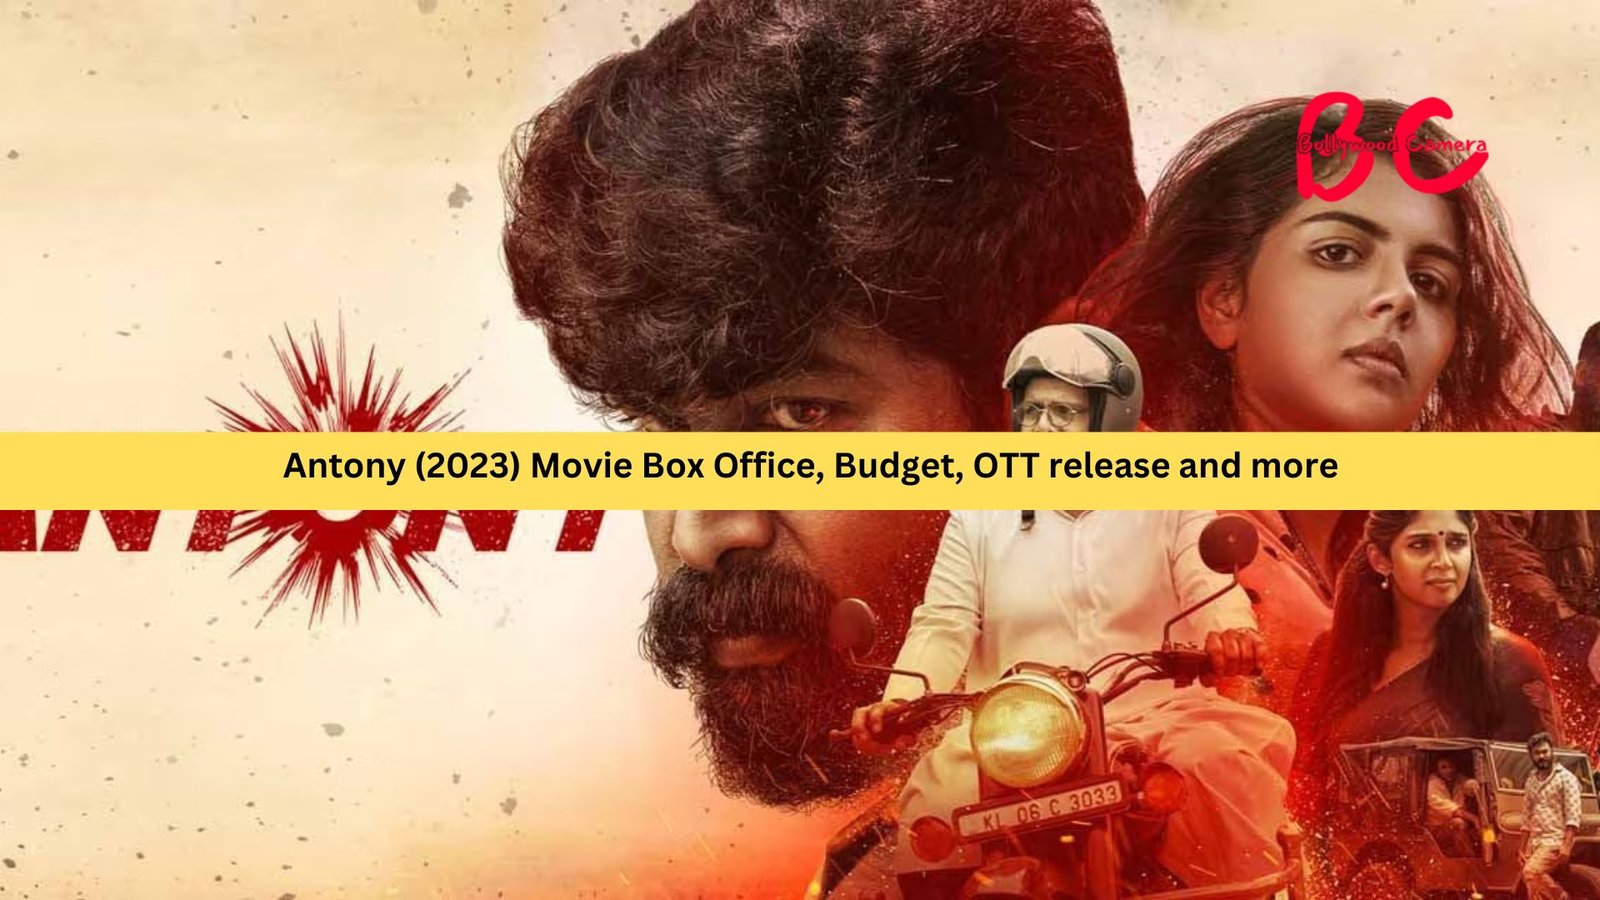 Antony (2023) Movie Box Office, Budget, OTT release and more